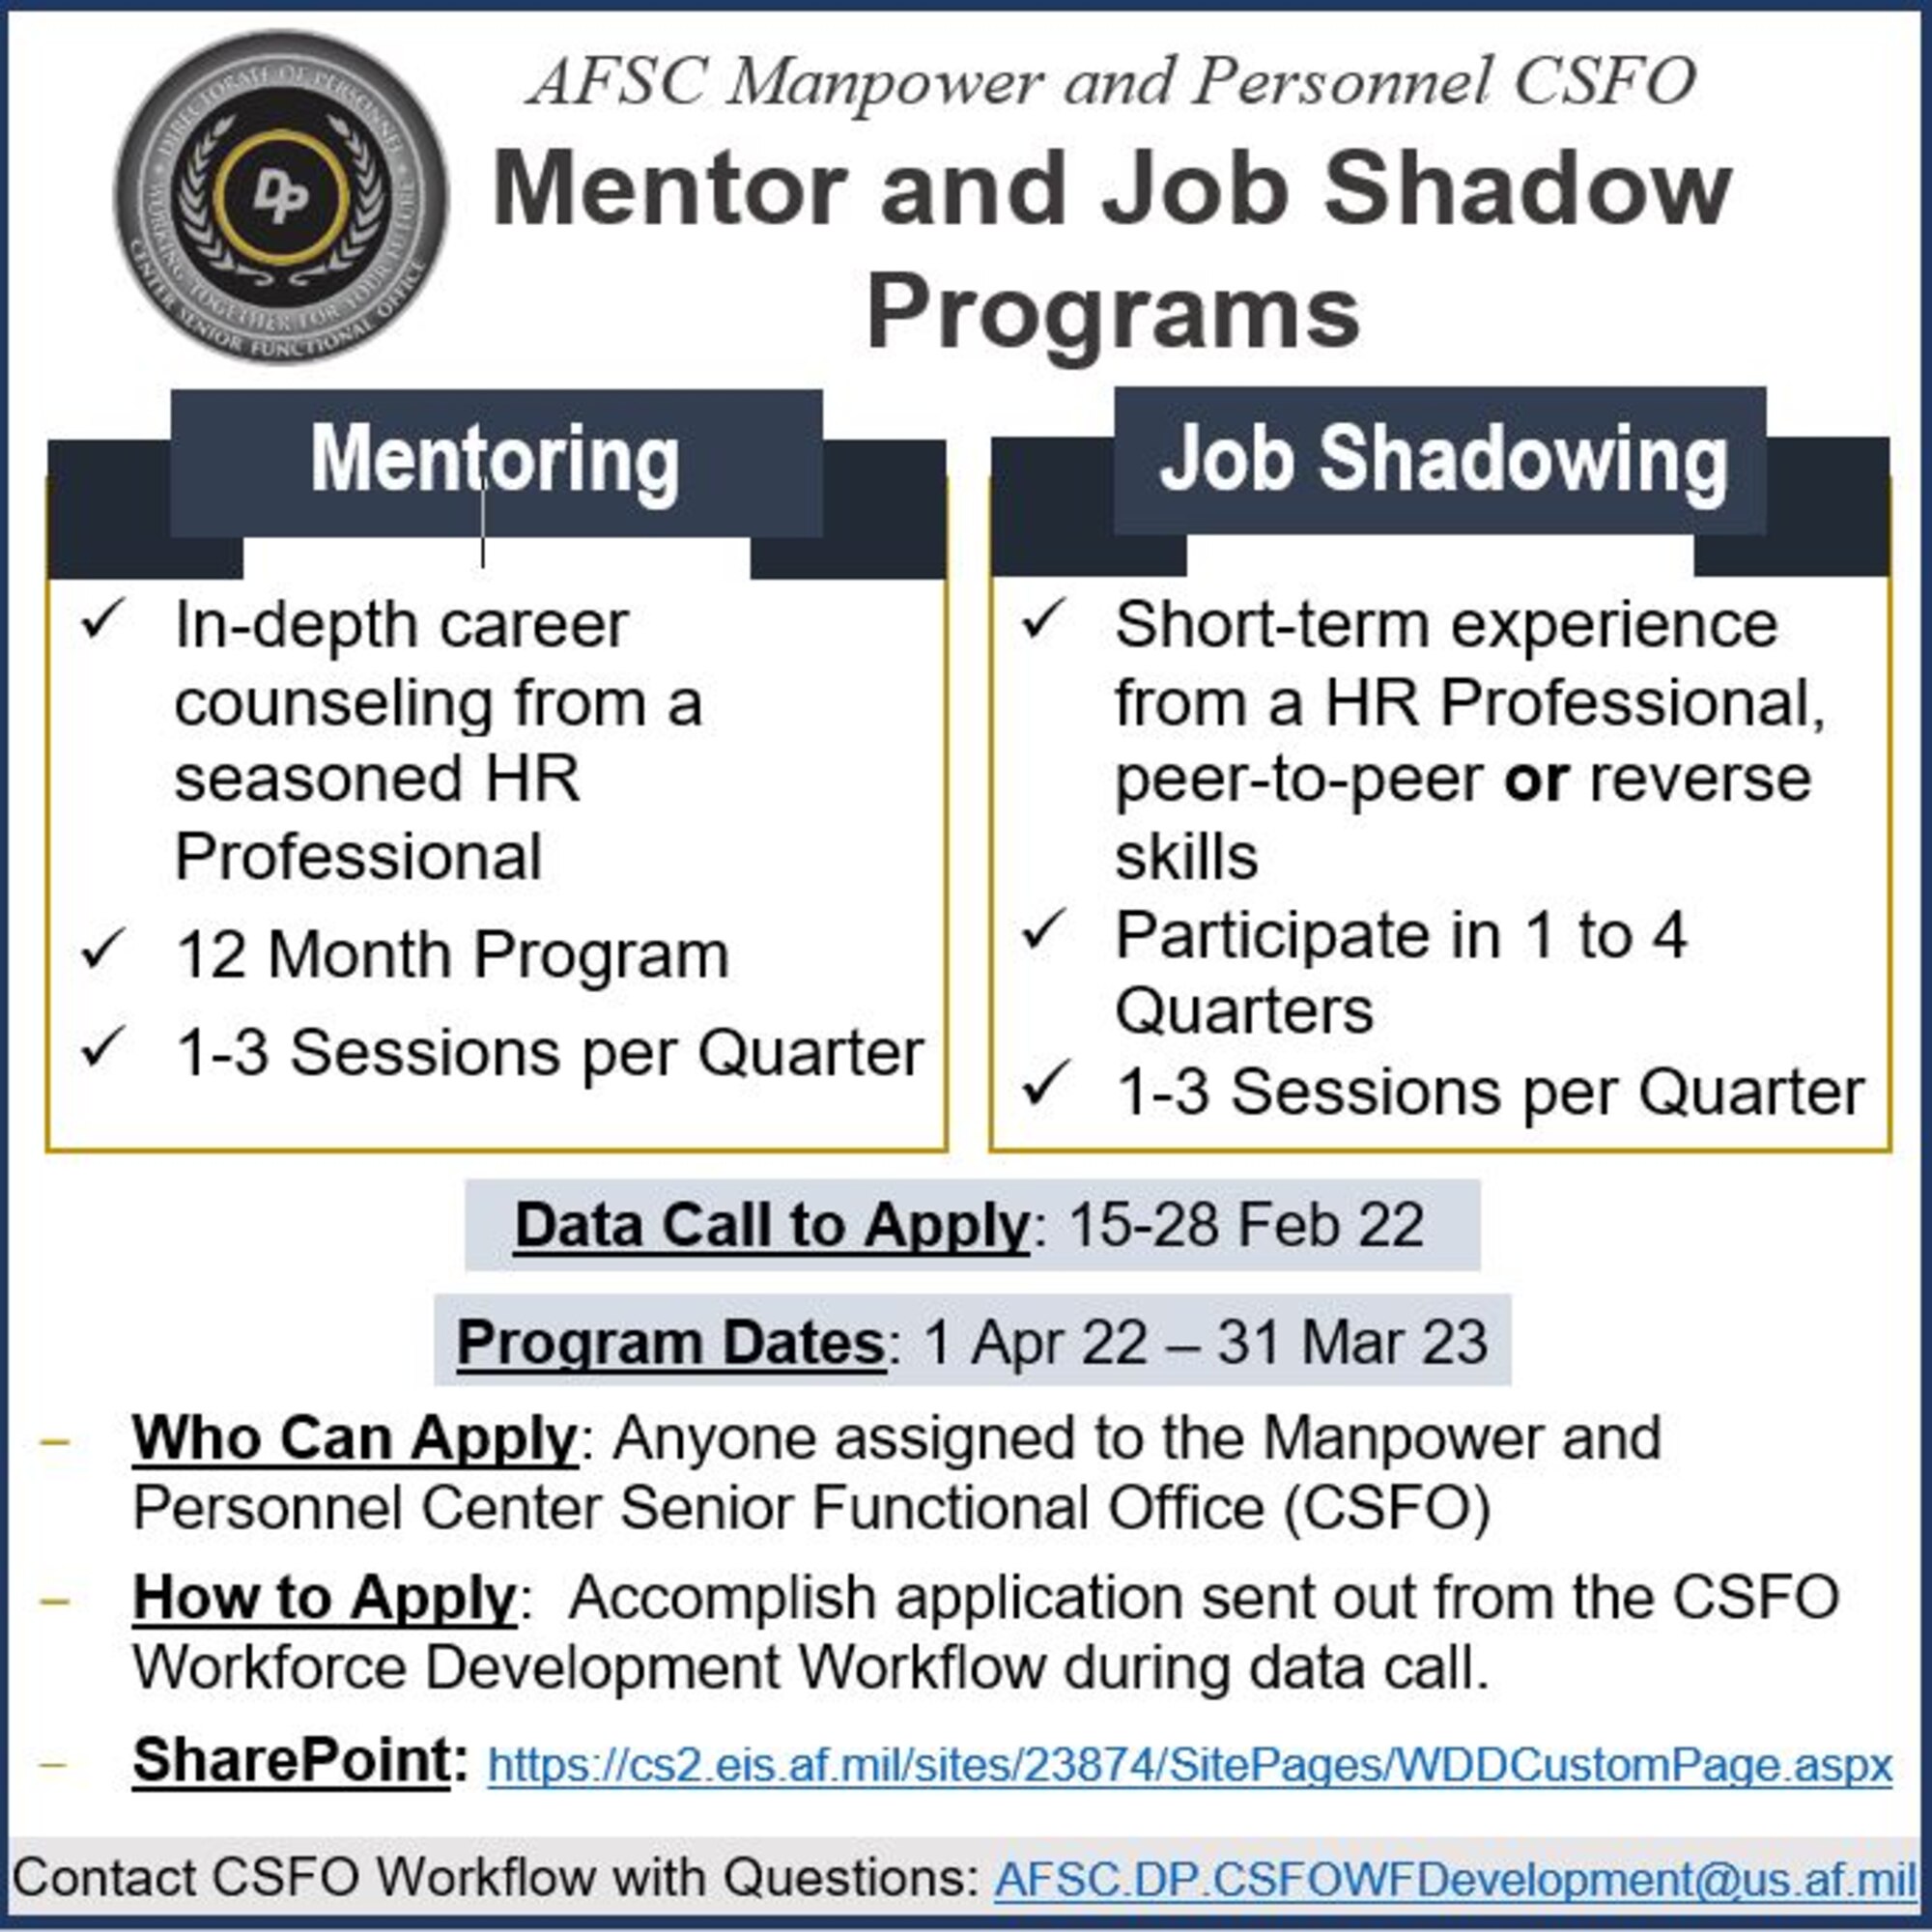 The AFSC Manpower and Personnel Center Senior Functional Office (DP CSFO) is launching the second year of our Mentoring and Job Shadow programs.